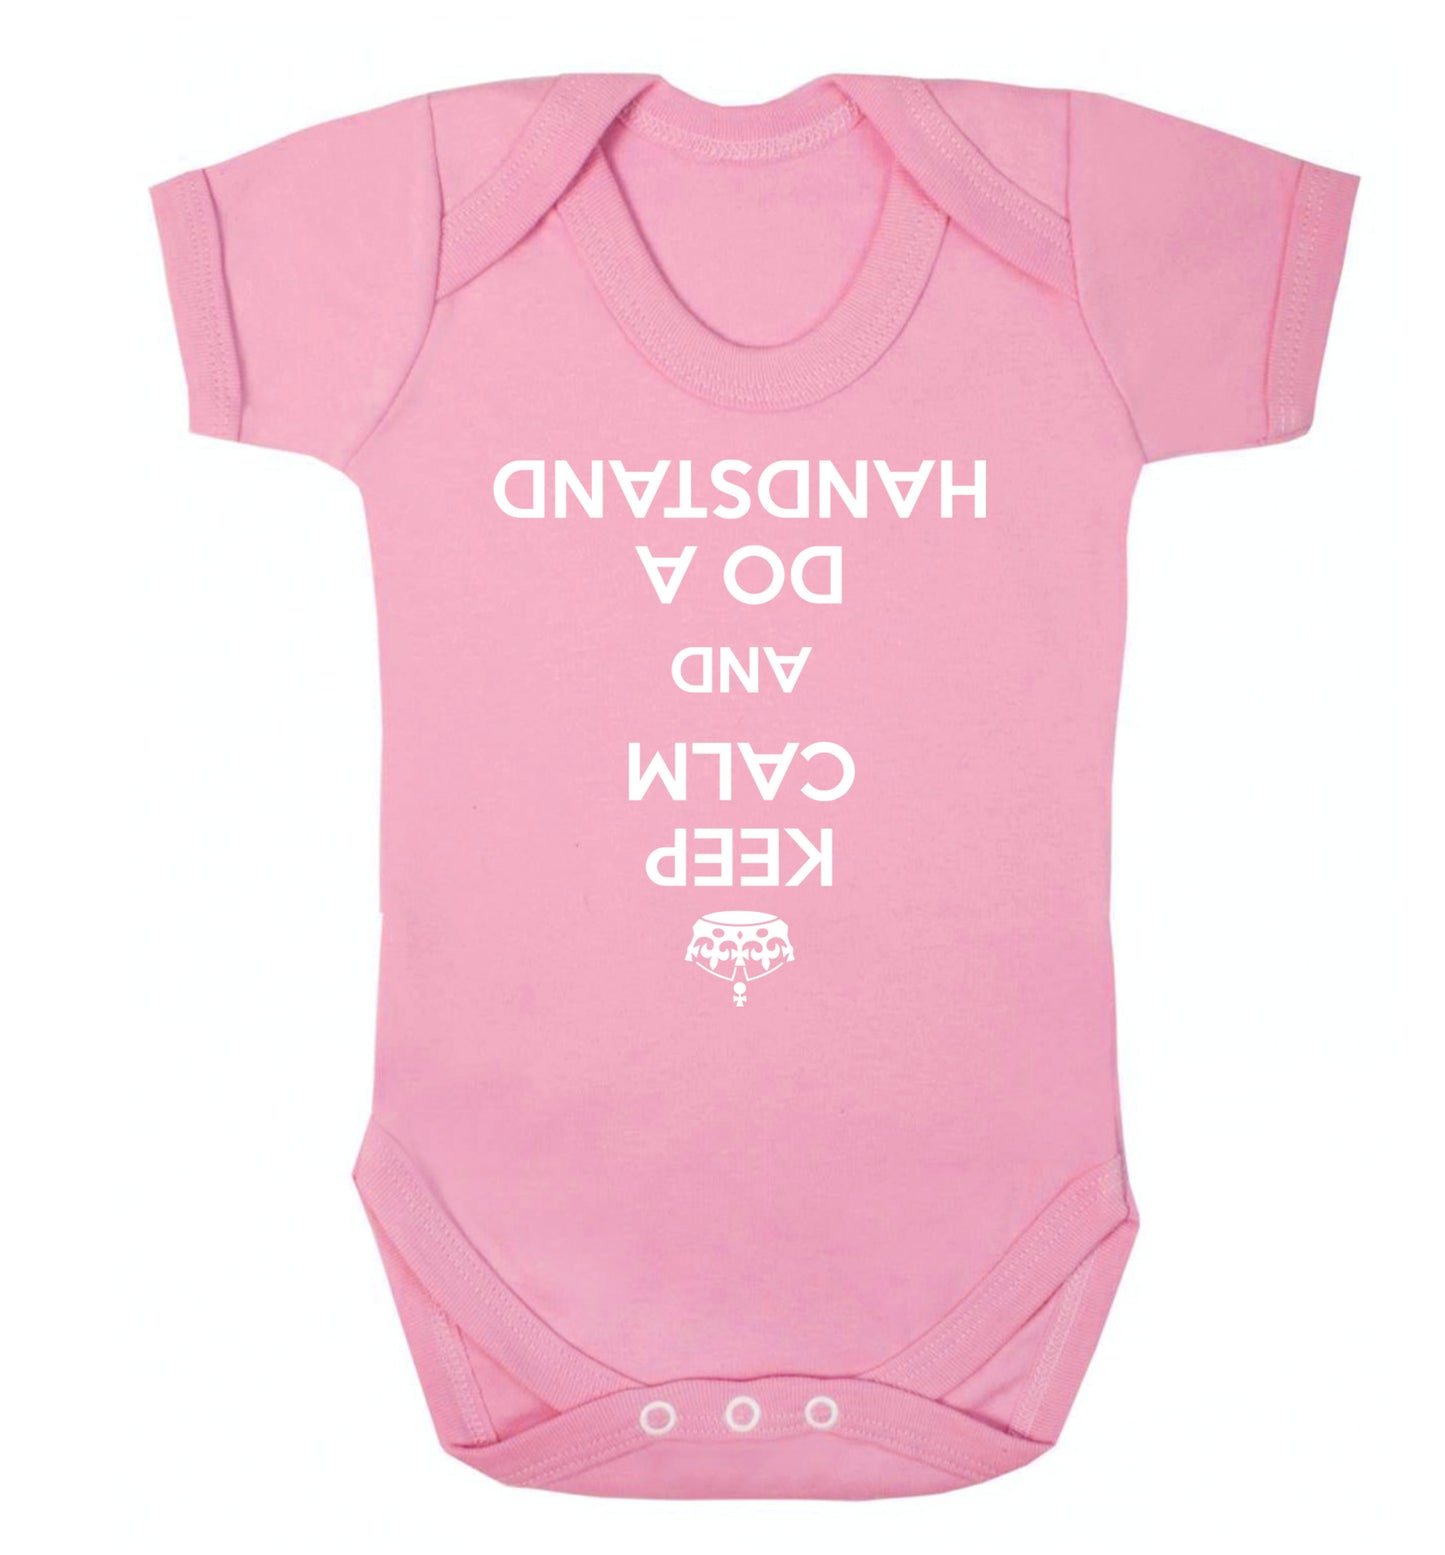 Keep calm and do a handstand Baby Vest pale pink 18-24 months